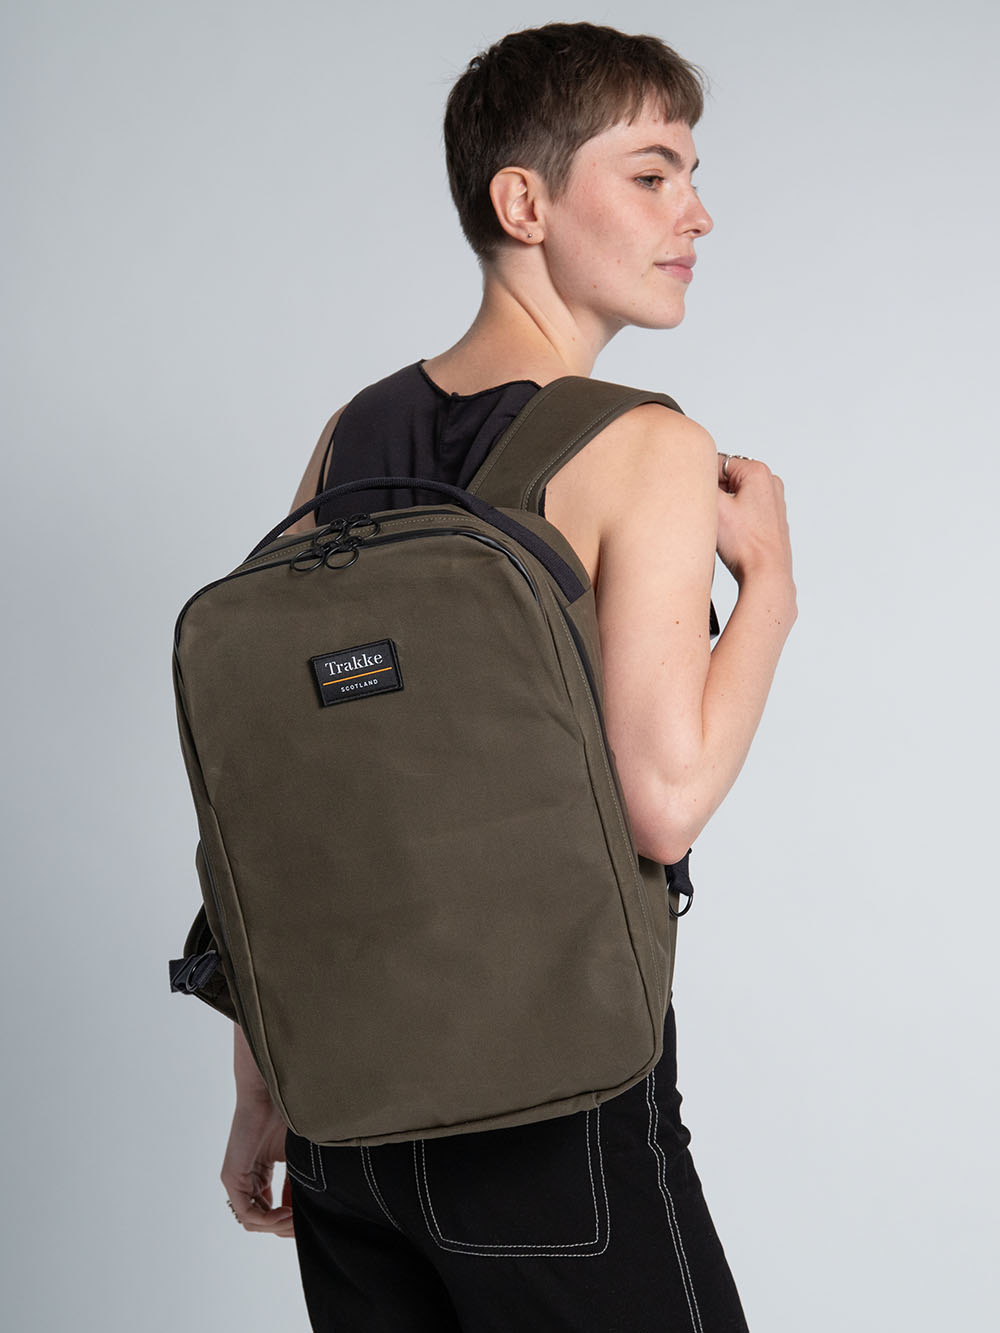 THE 32 REMOVABLE PATCHES VELCRO BACKPACK